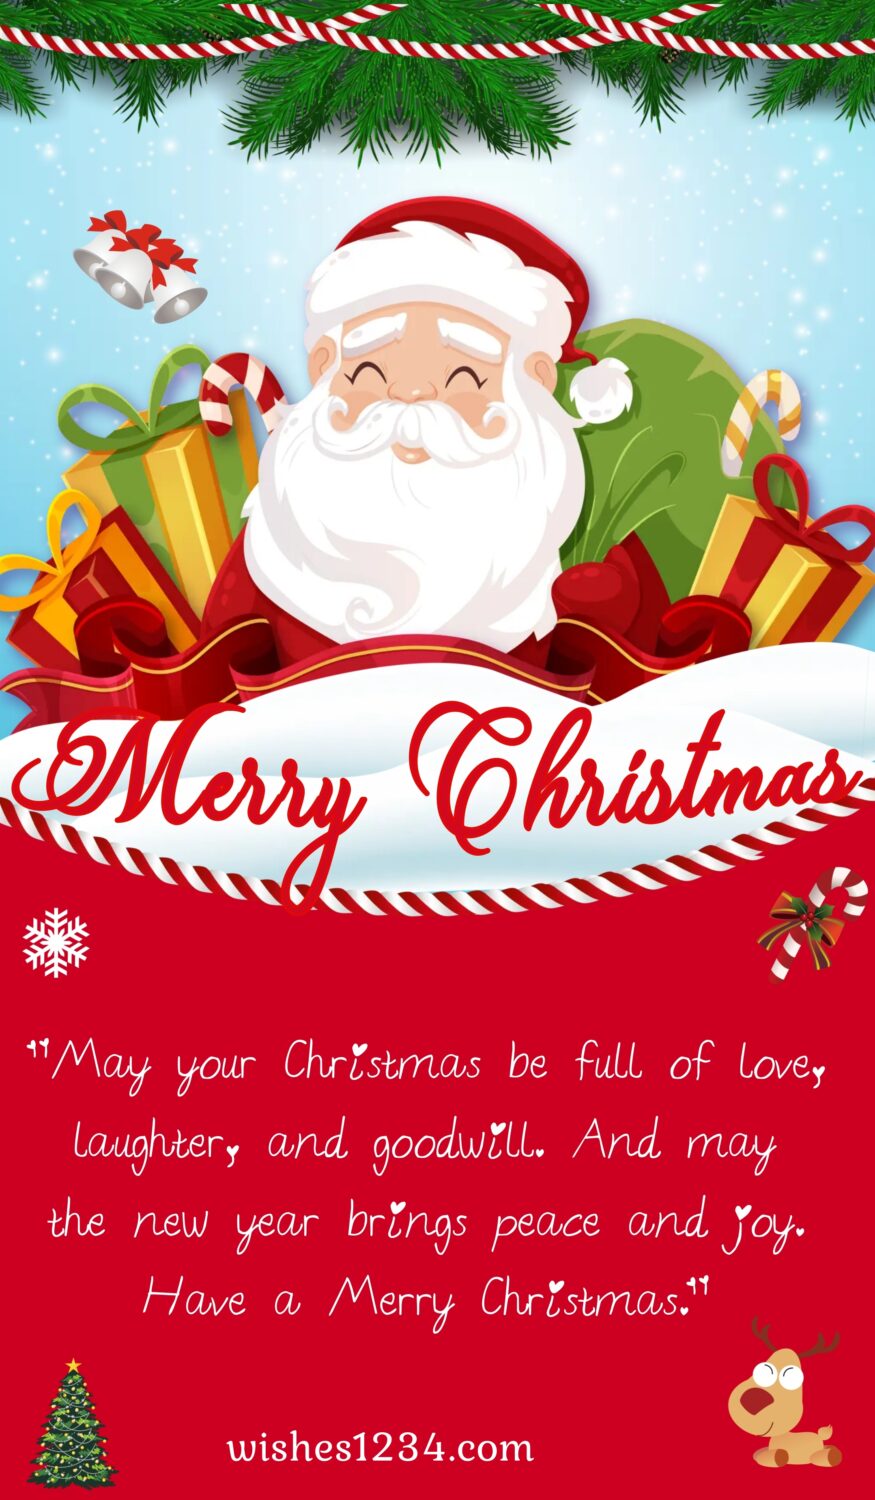 Santa with lot of gifts, Merry Christmas Quotes & short wishes.